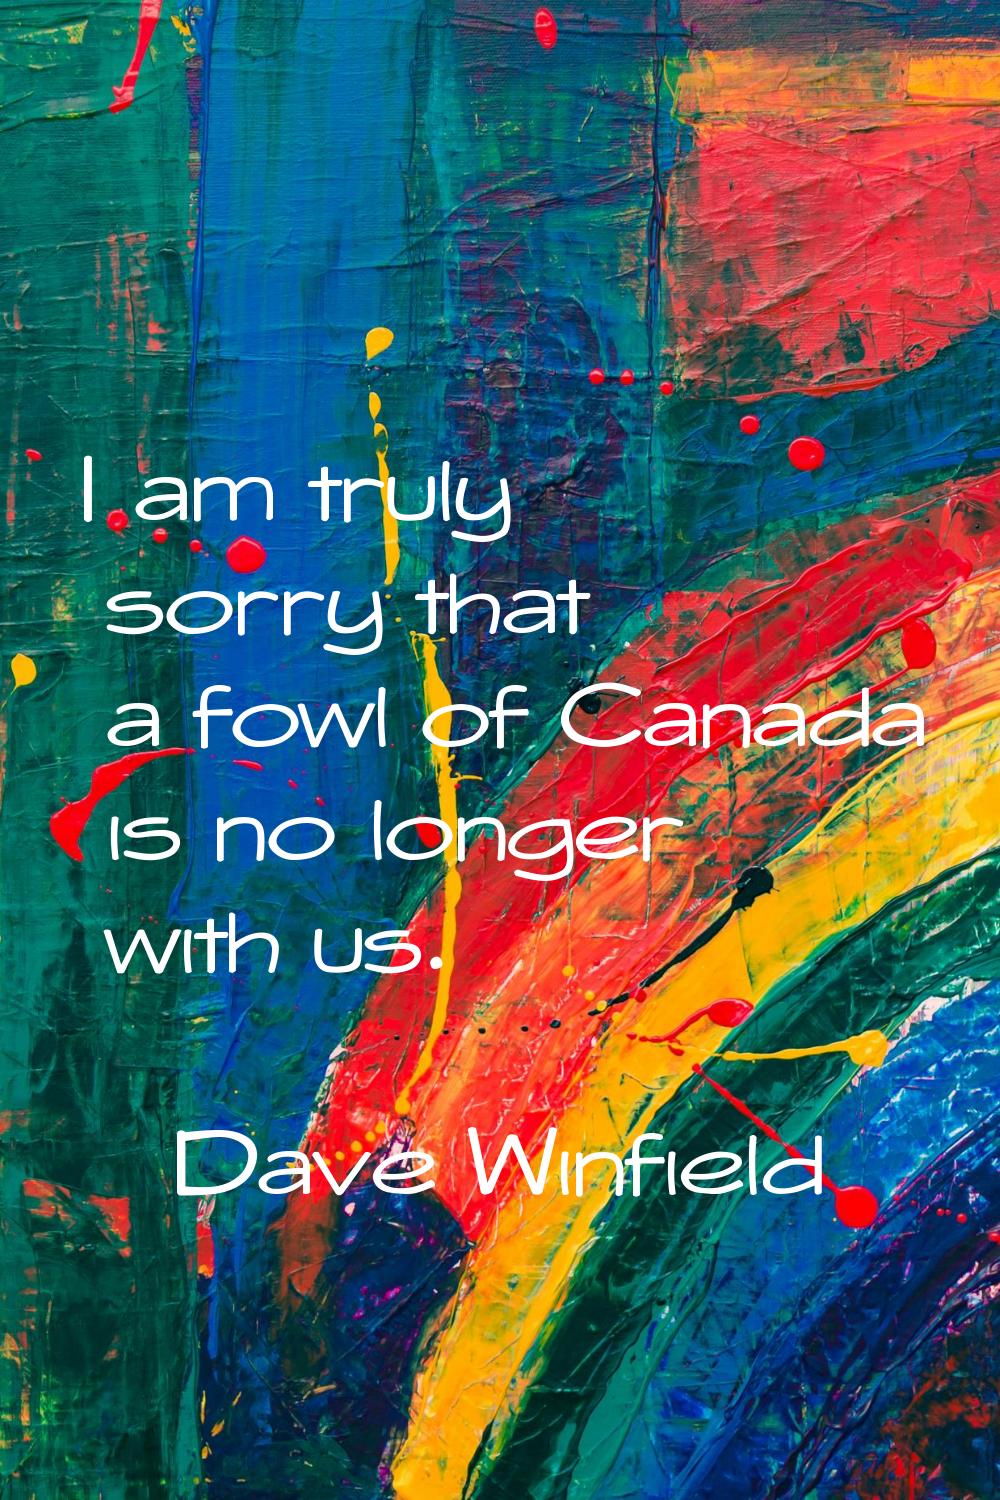 I am truly sorry that a fowl of Canada is no longer with us.